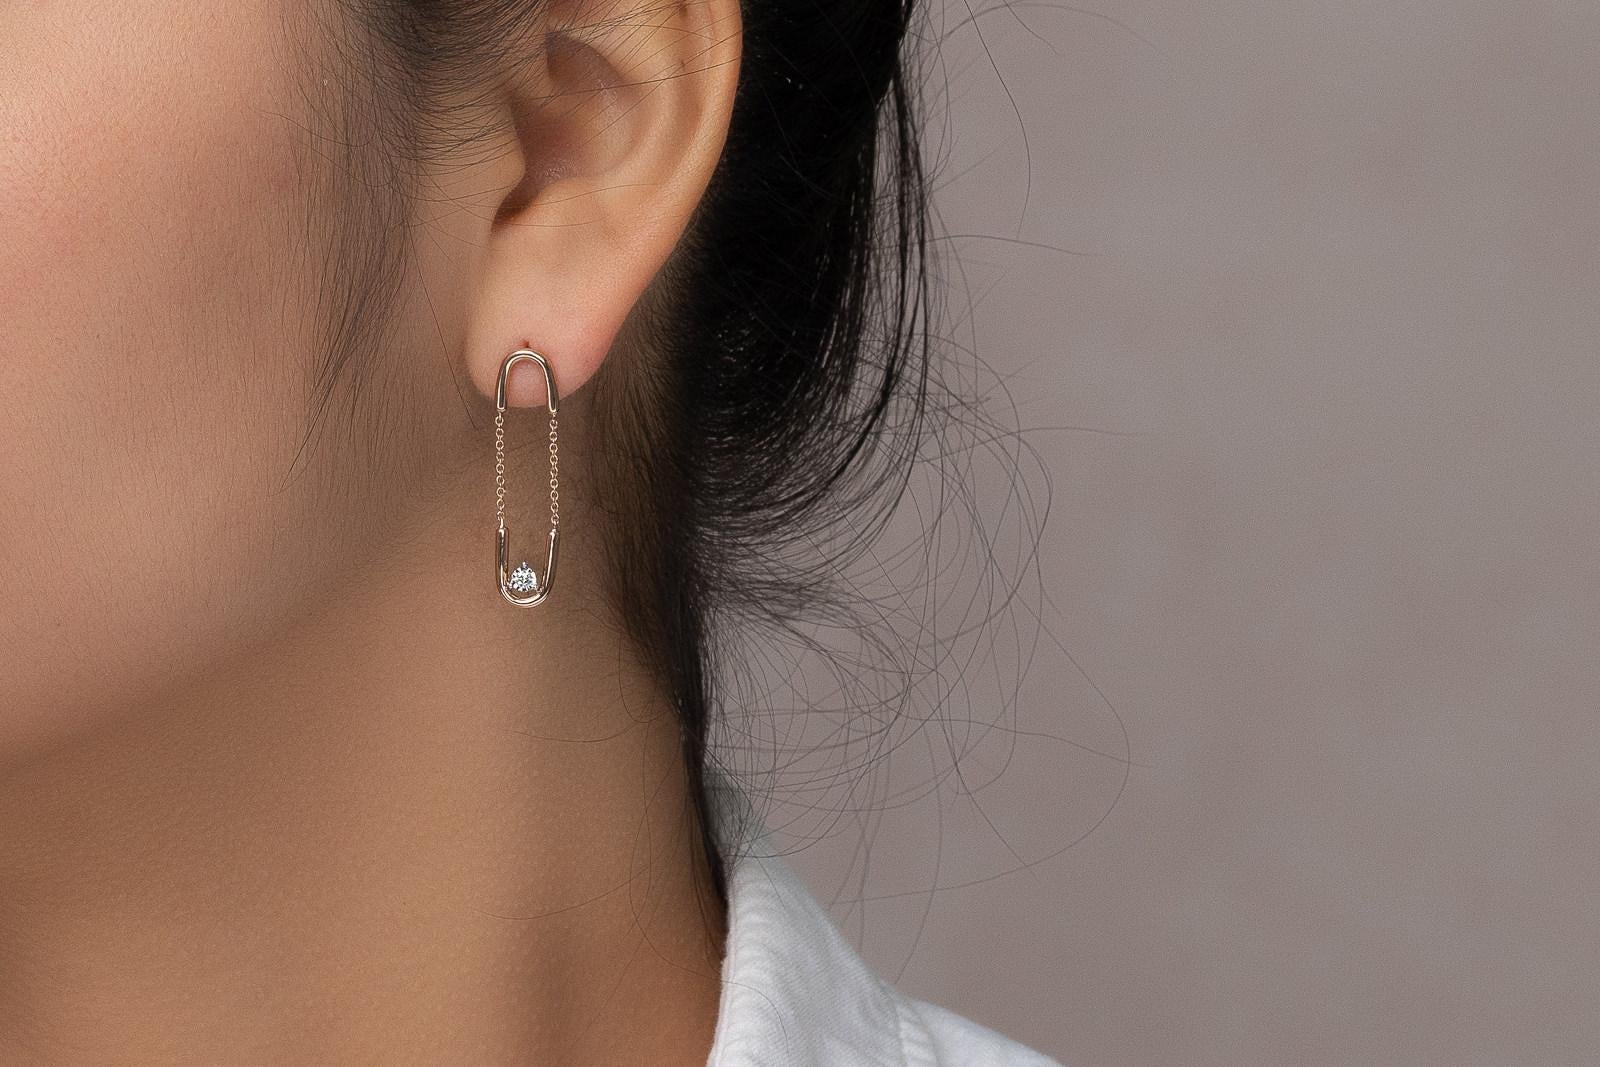 Arguably our most unique jewelry design in our collection, the Paperclip Dangling Diamond Earrings are a guarantee conversation starter. The name of these dangling diamond earrings comes from, not only the resemble to paperclips, but also their